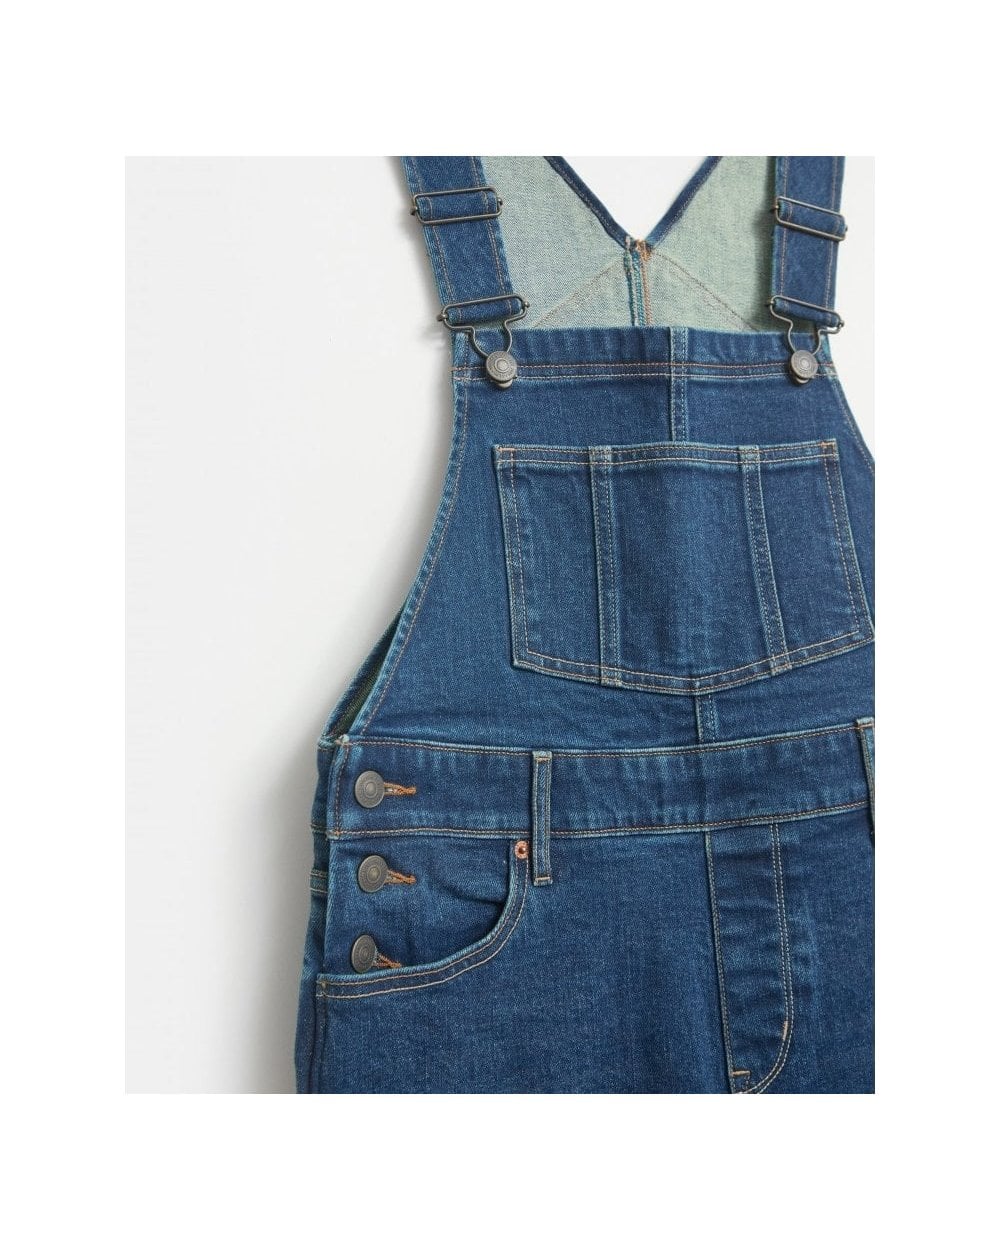 Isabelle Dungaree